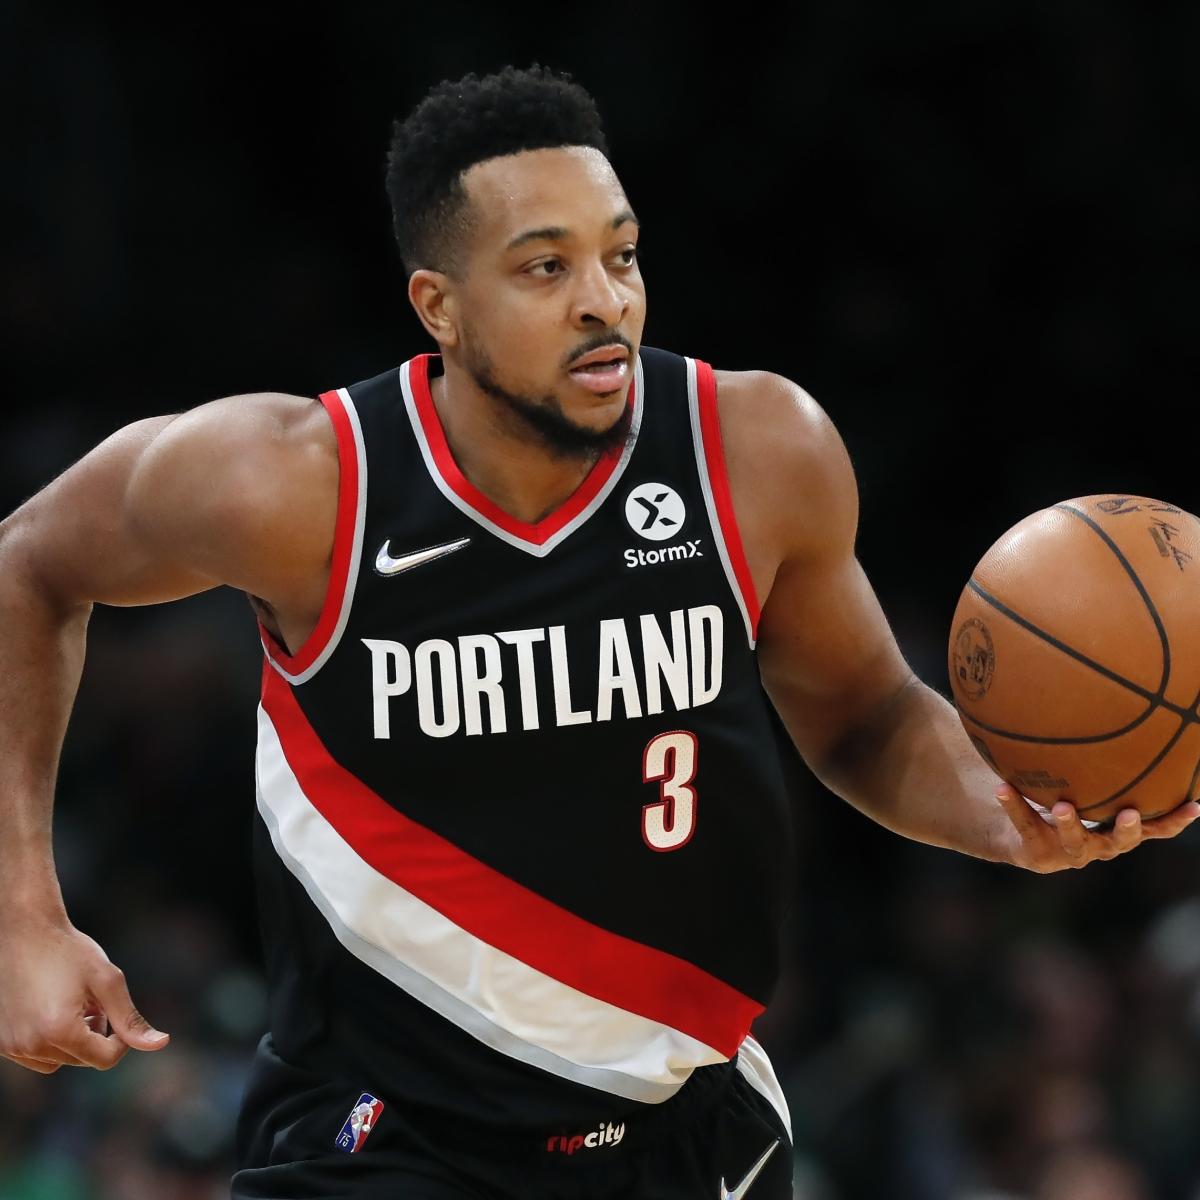 New Orleans Pelicans] CJ McCollum and Tony Snell are expected to